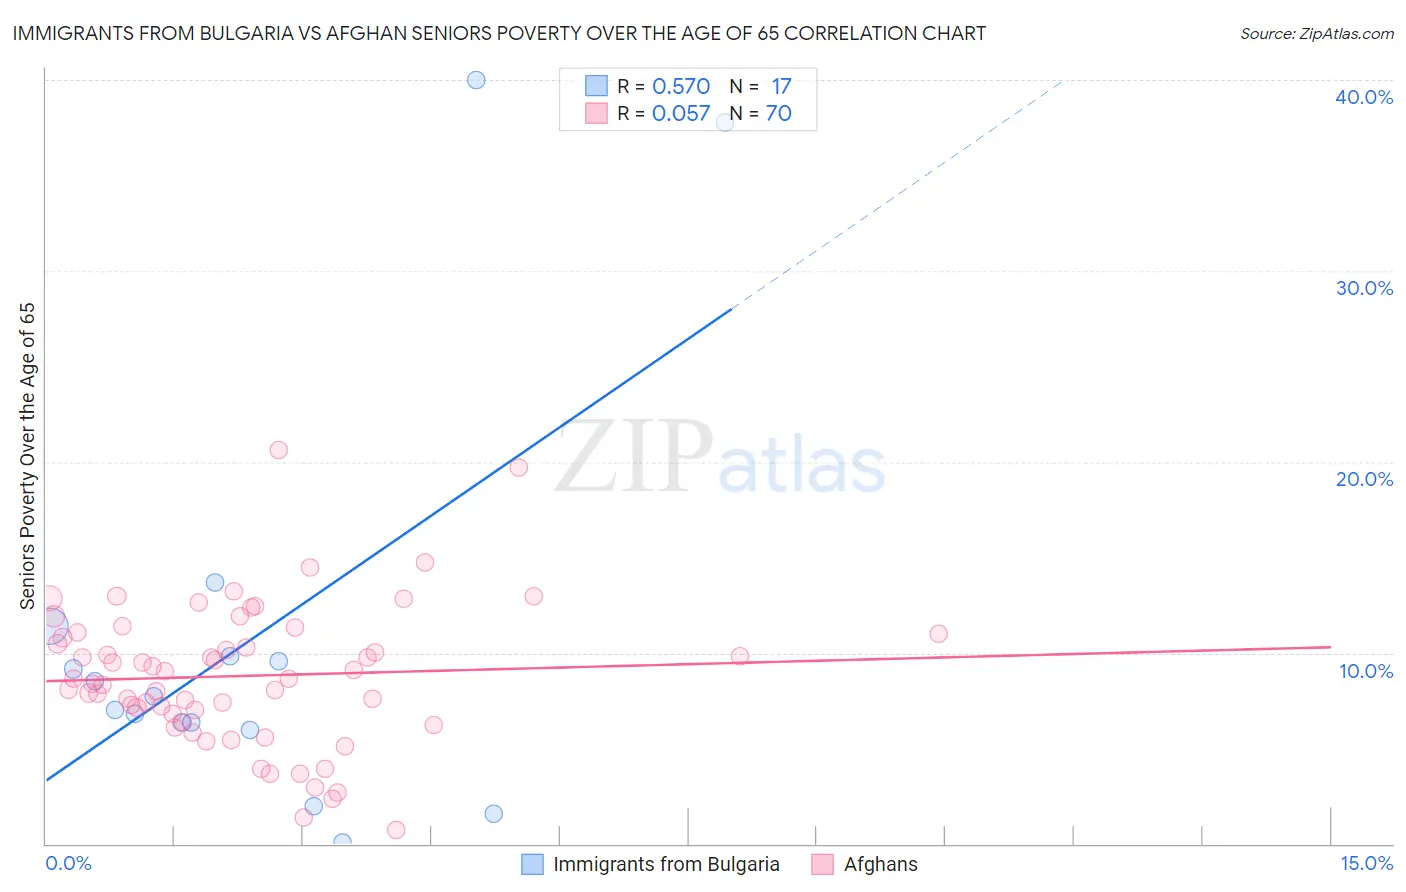 Immigrants from Bulgaria vs Afghan Seniors Poverty Over the Age of 65